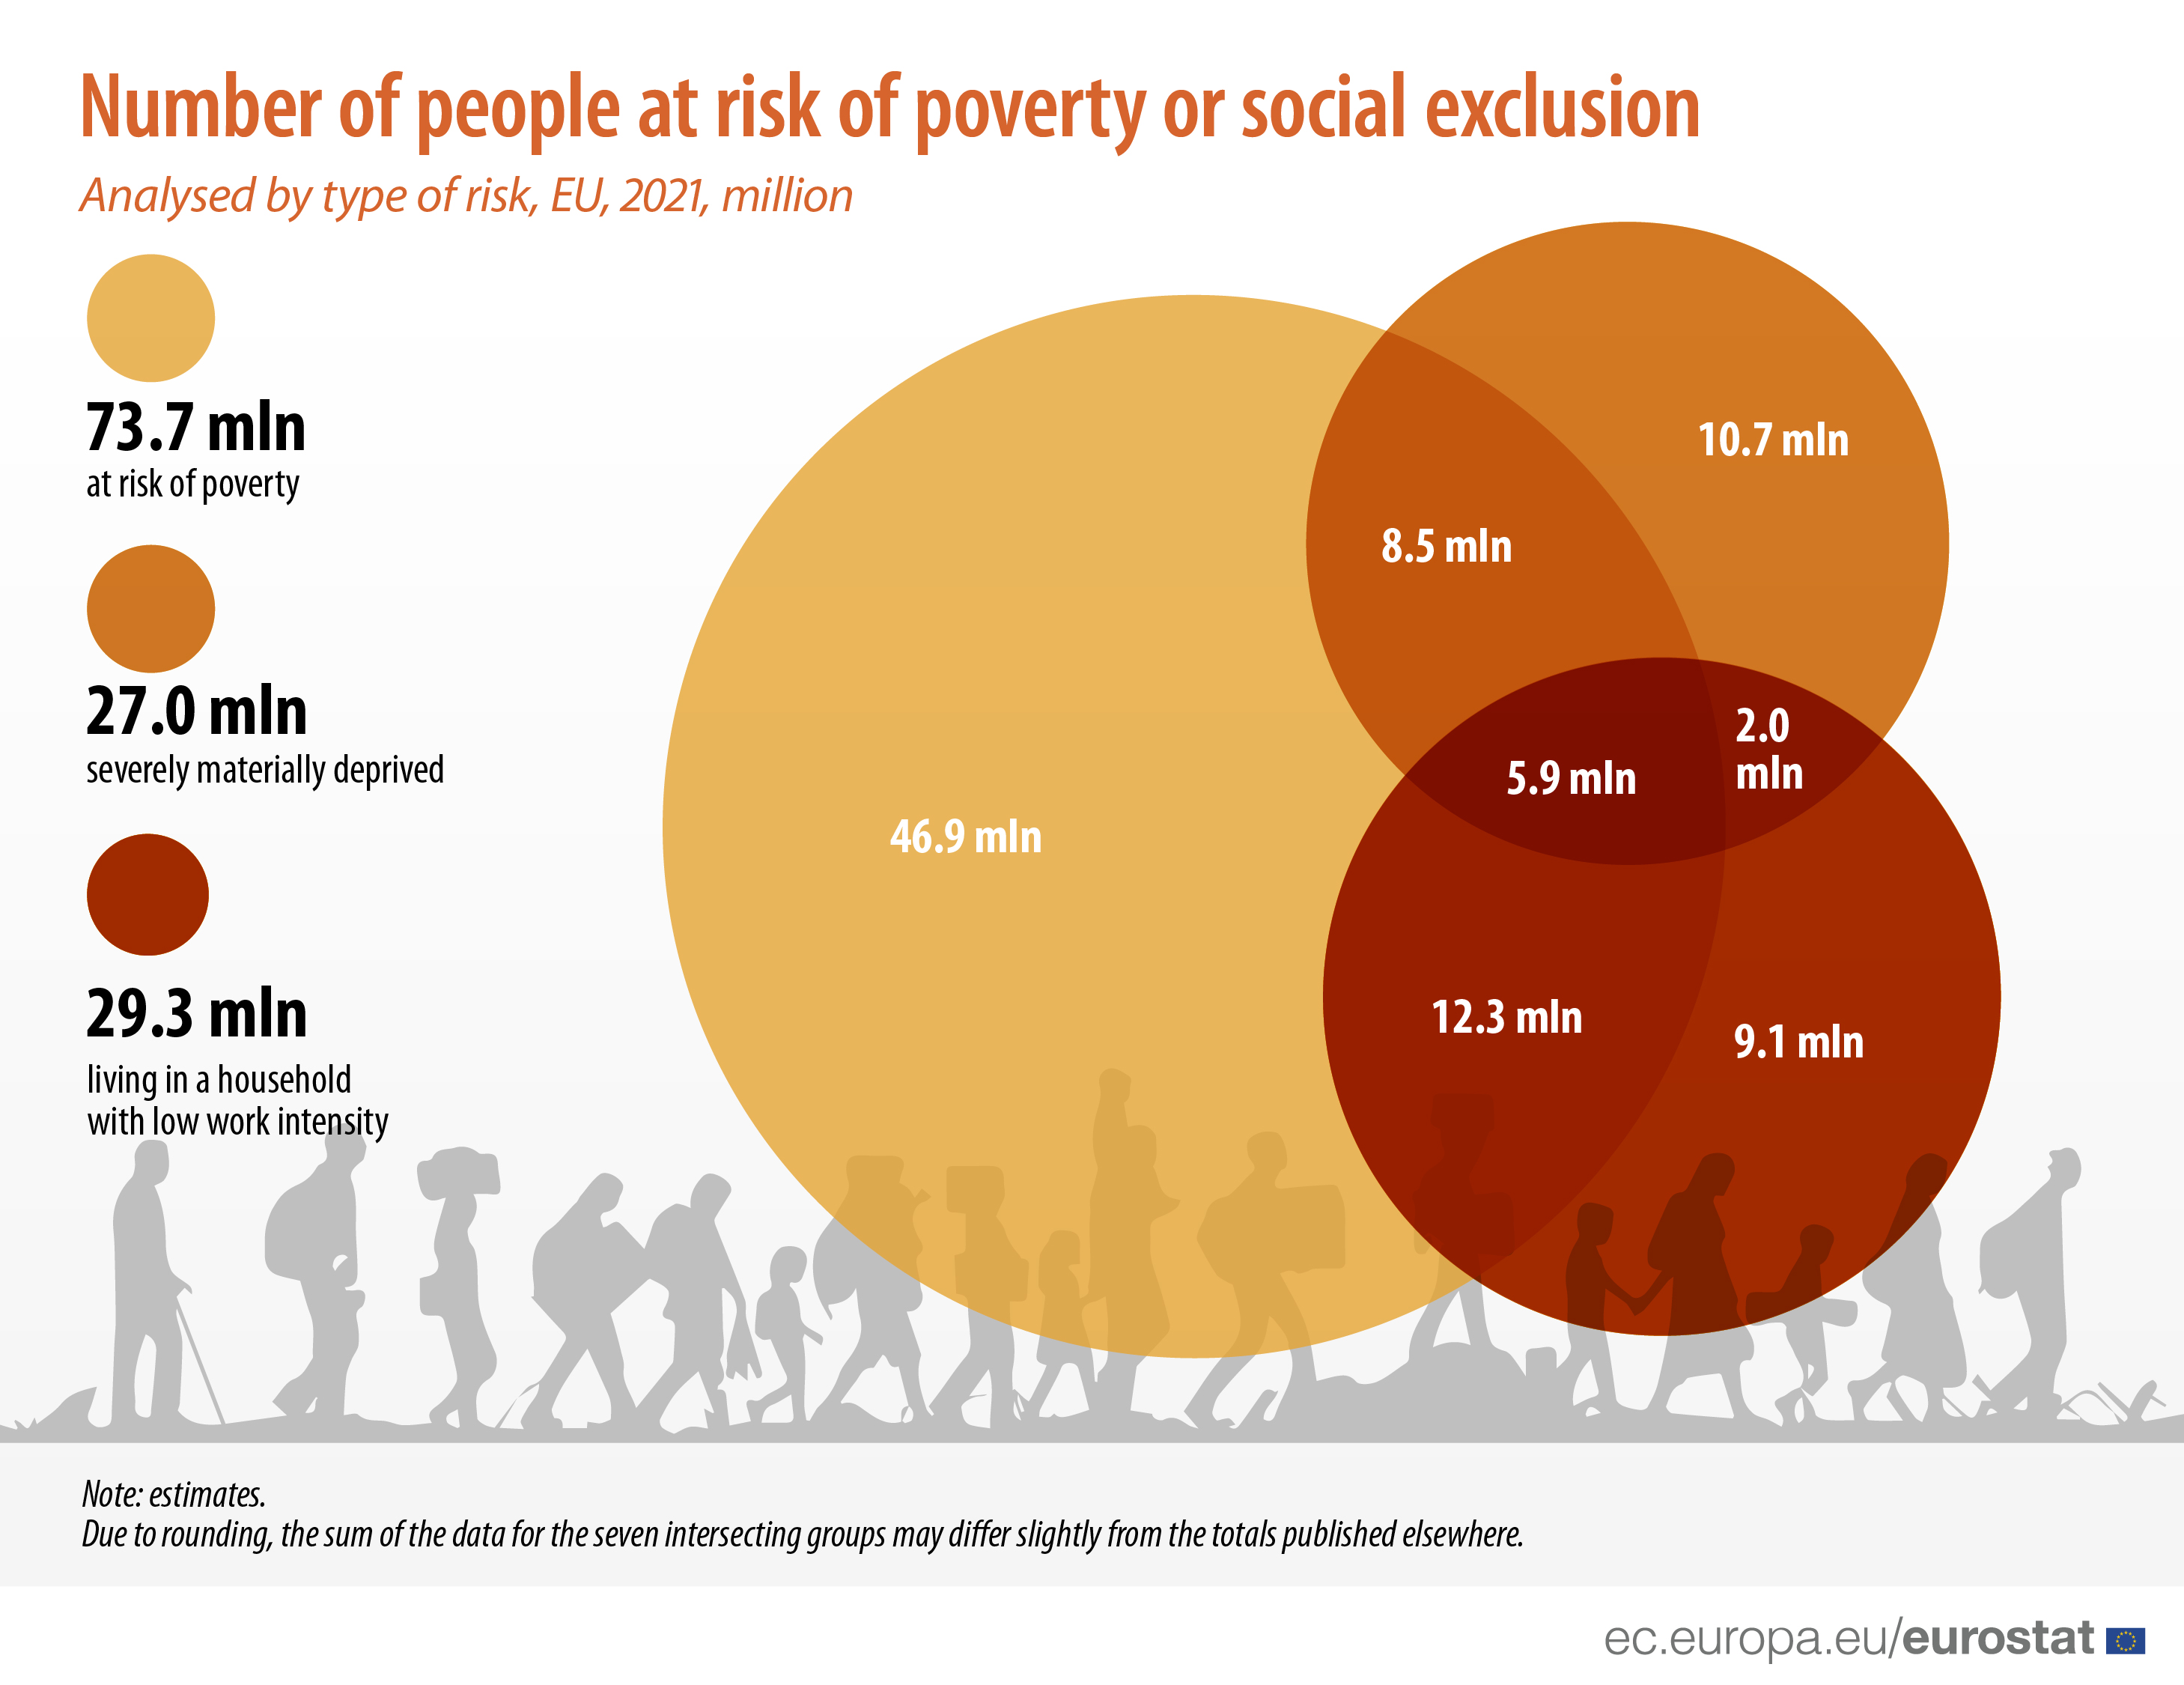 Pie charts: Number of people at risk of poverty or social exclusion in the EU in 2021, analysed by type of risk, in millions